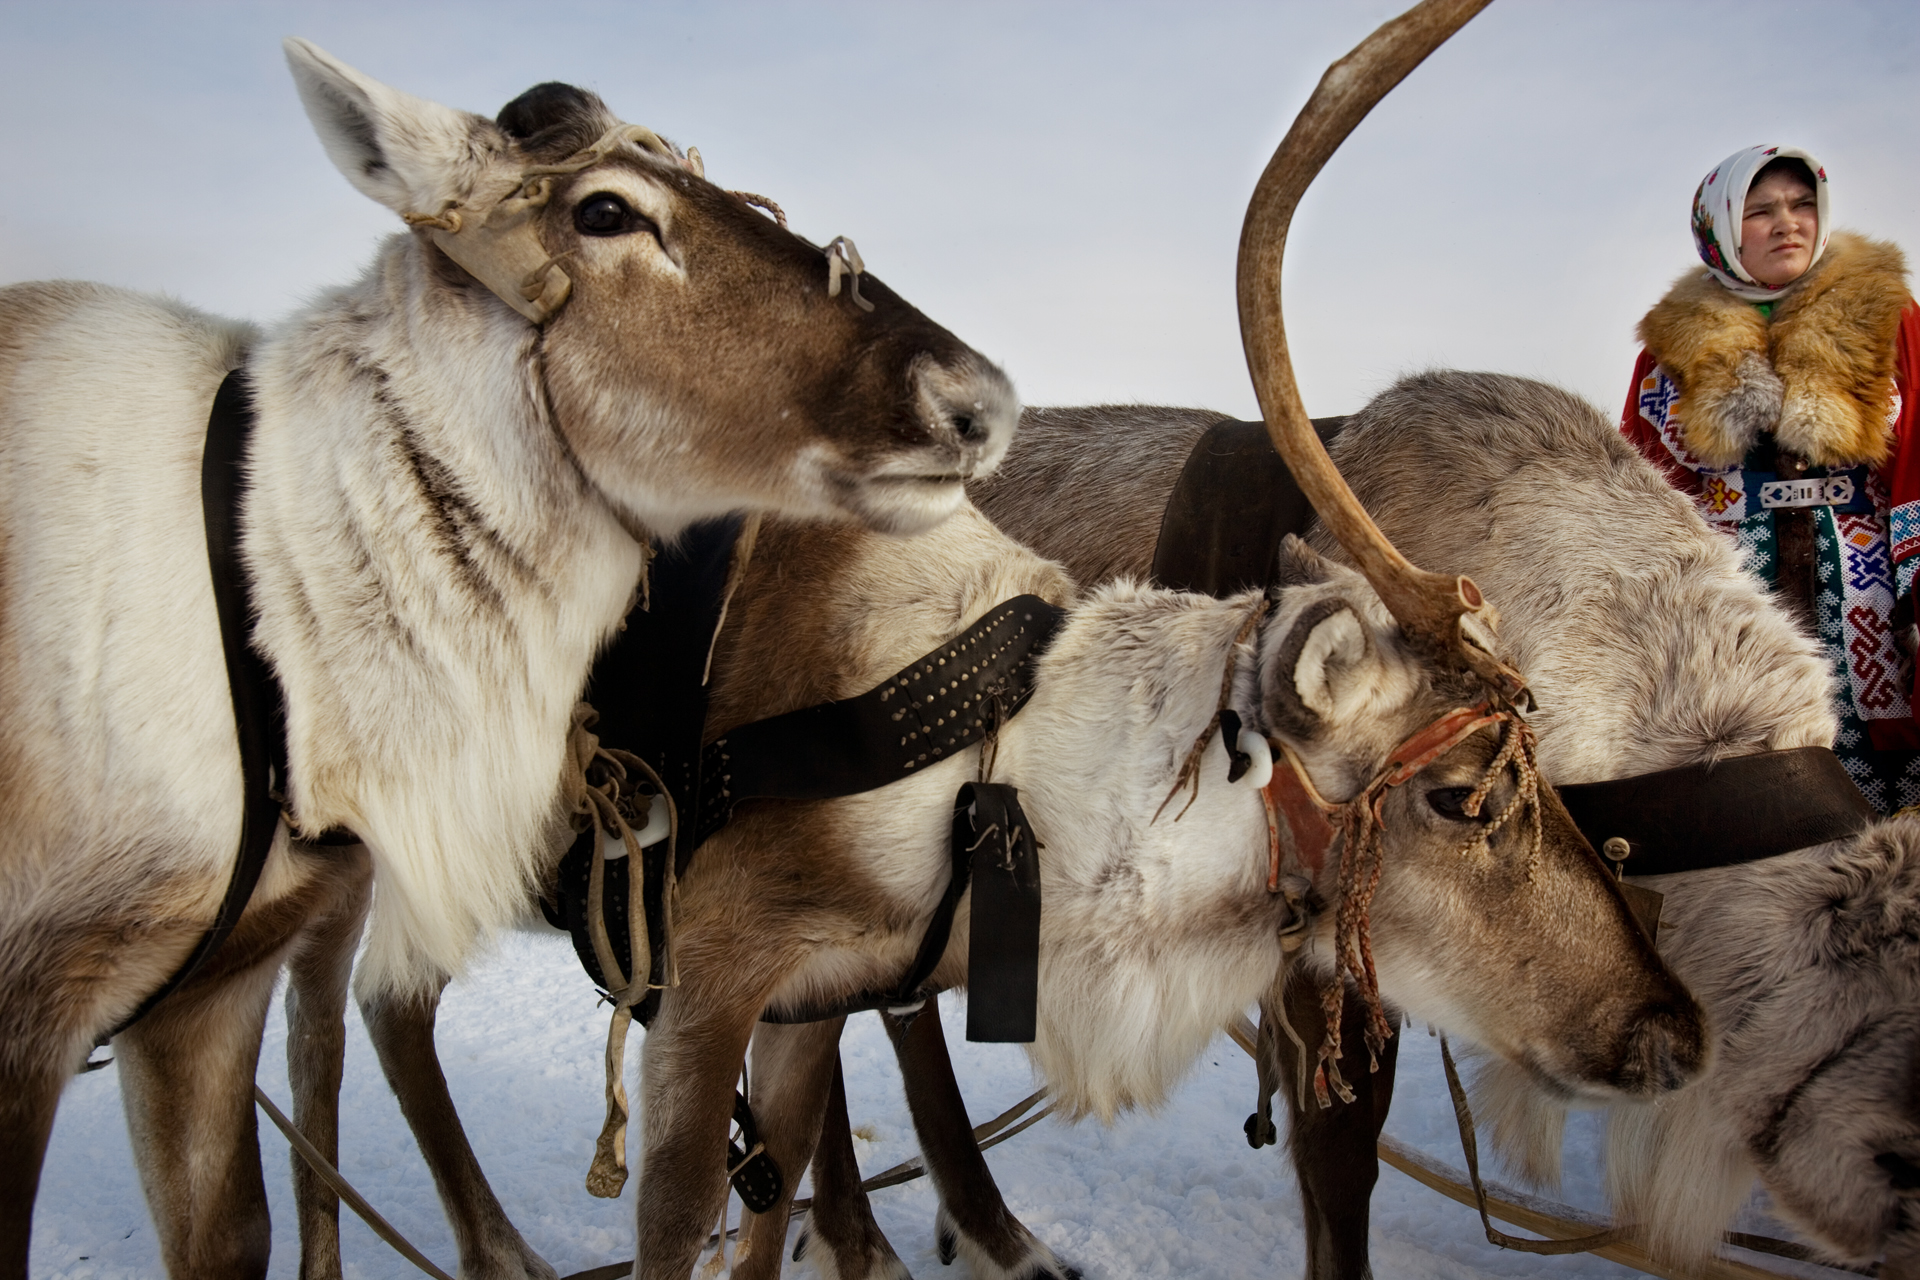  Traditionally, reindeer provided food, clothes, shelter and transportation for most indigenous groups in the Khanty-Mansiysk region.  Near Saranpaul, Russia  